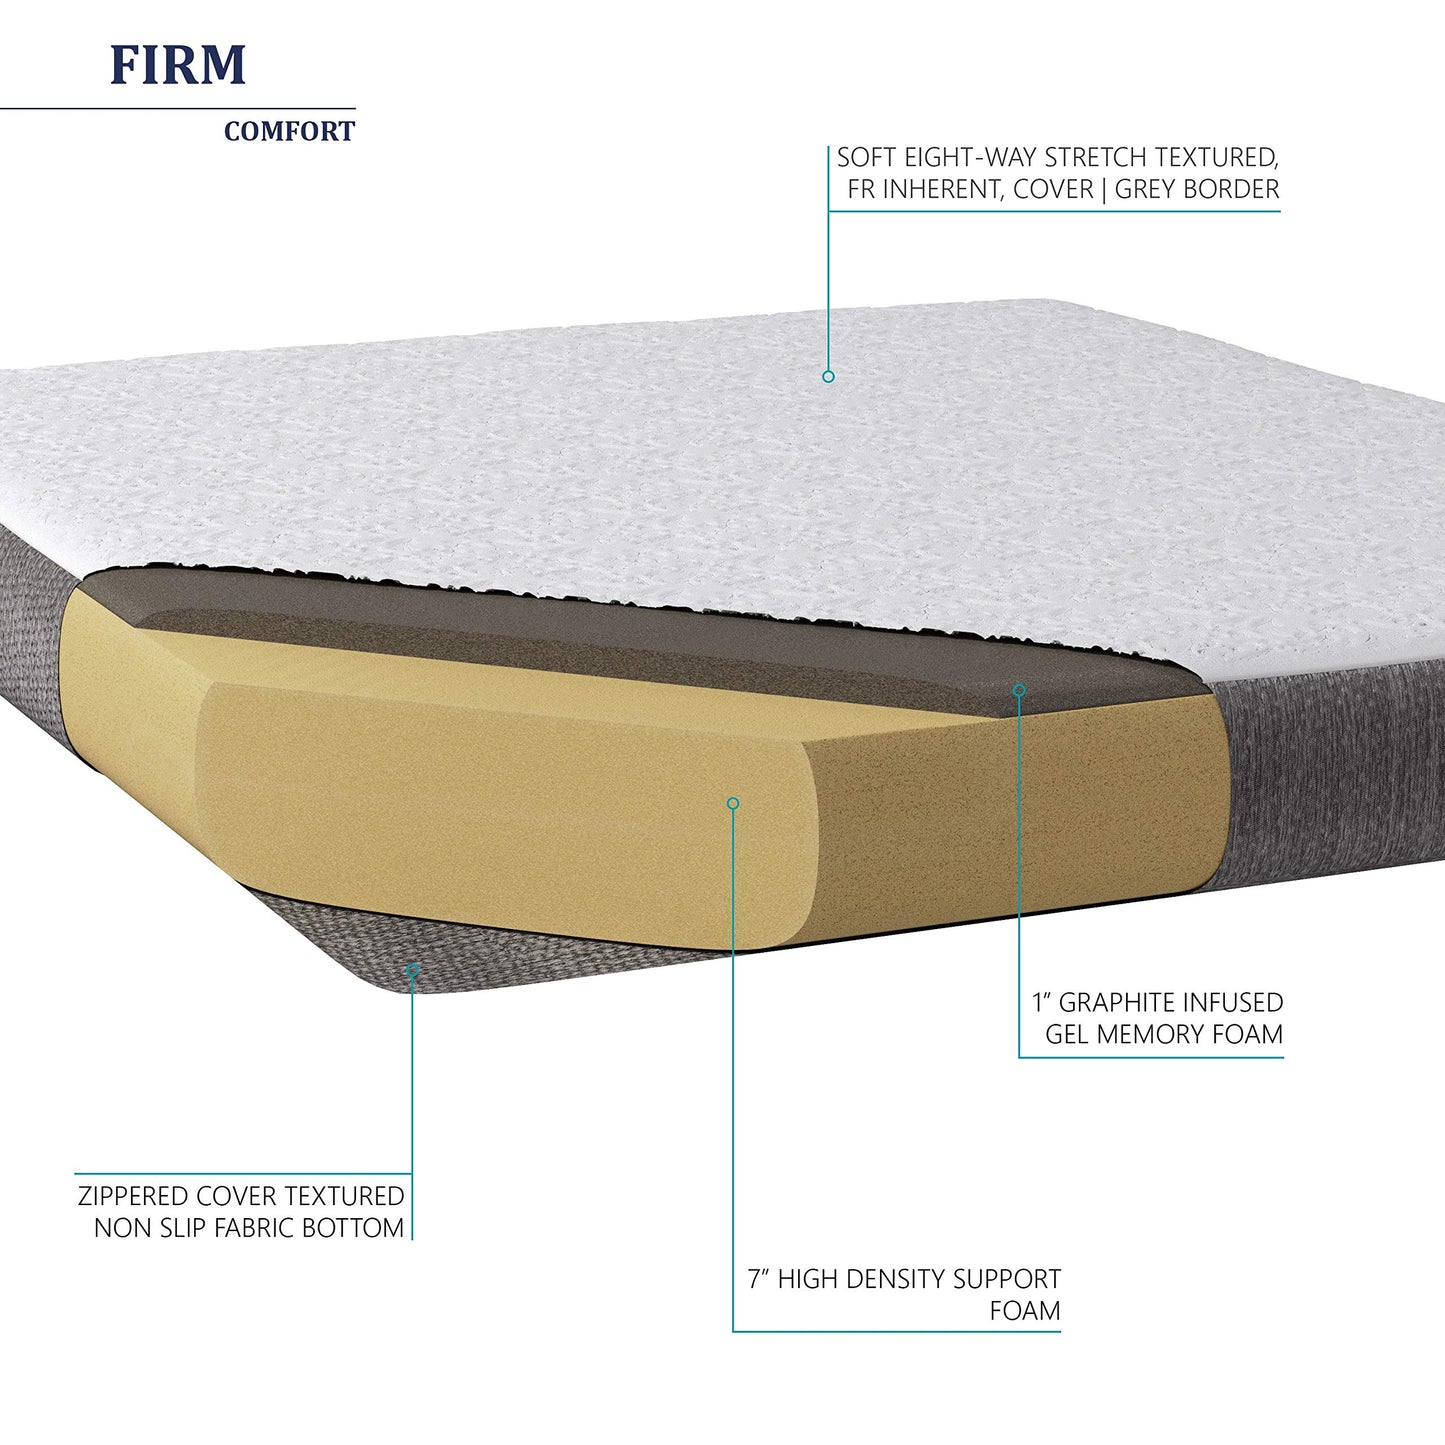 Travel Happy New Item 6 INCH (54x80) Graphite Gel Memory Foam Mattress for Medium Firm Comfort with A Premium 8-Way Stretch Cover for More Luxurious Comfort (Full XL)